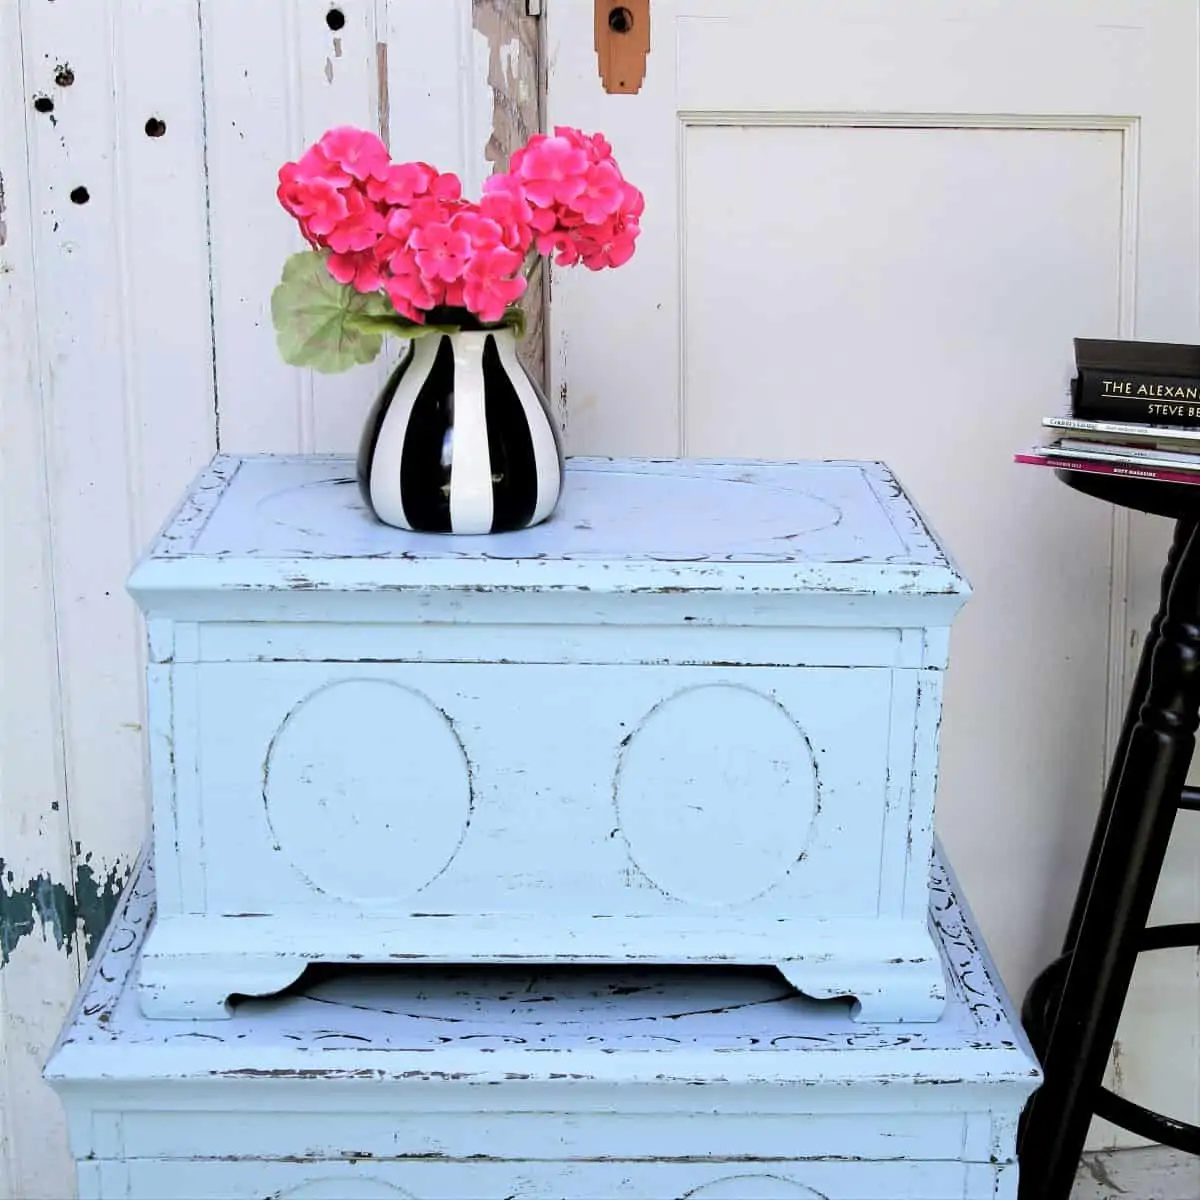 How To Make Paint Look Distressed Without Sanding